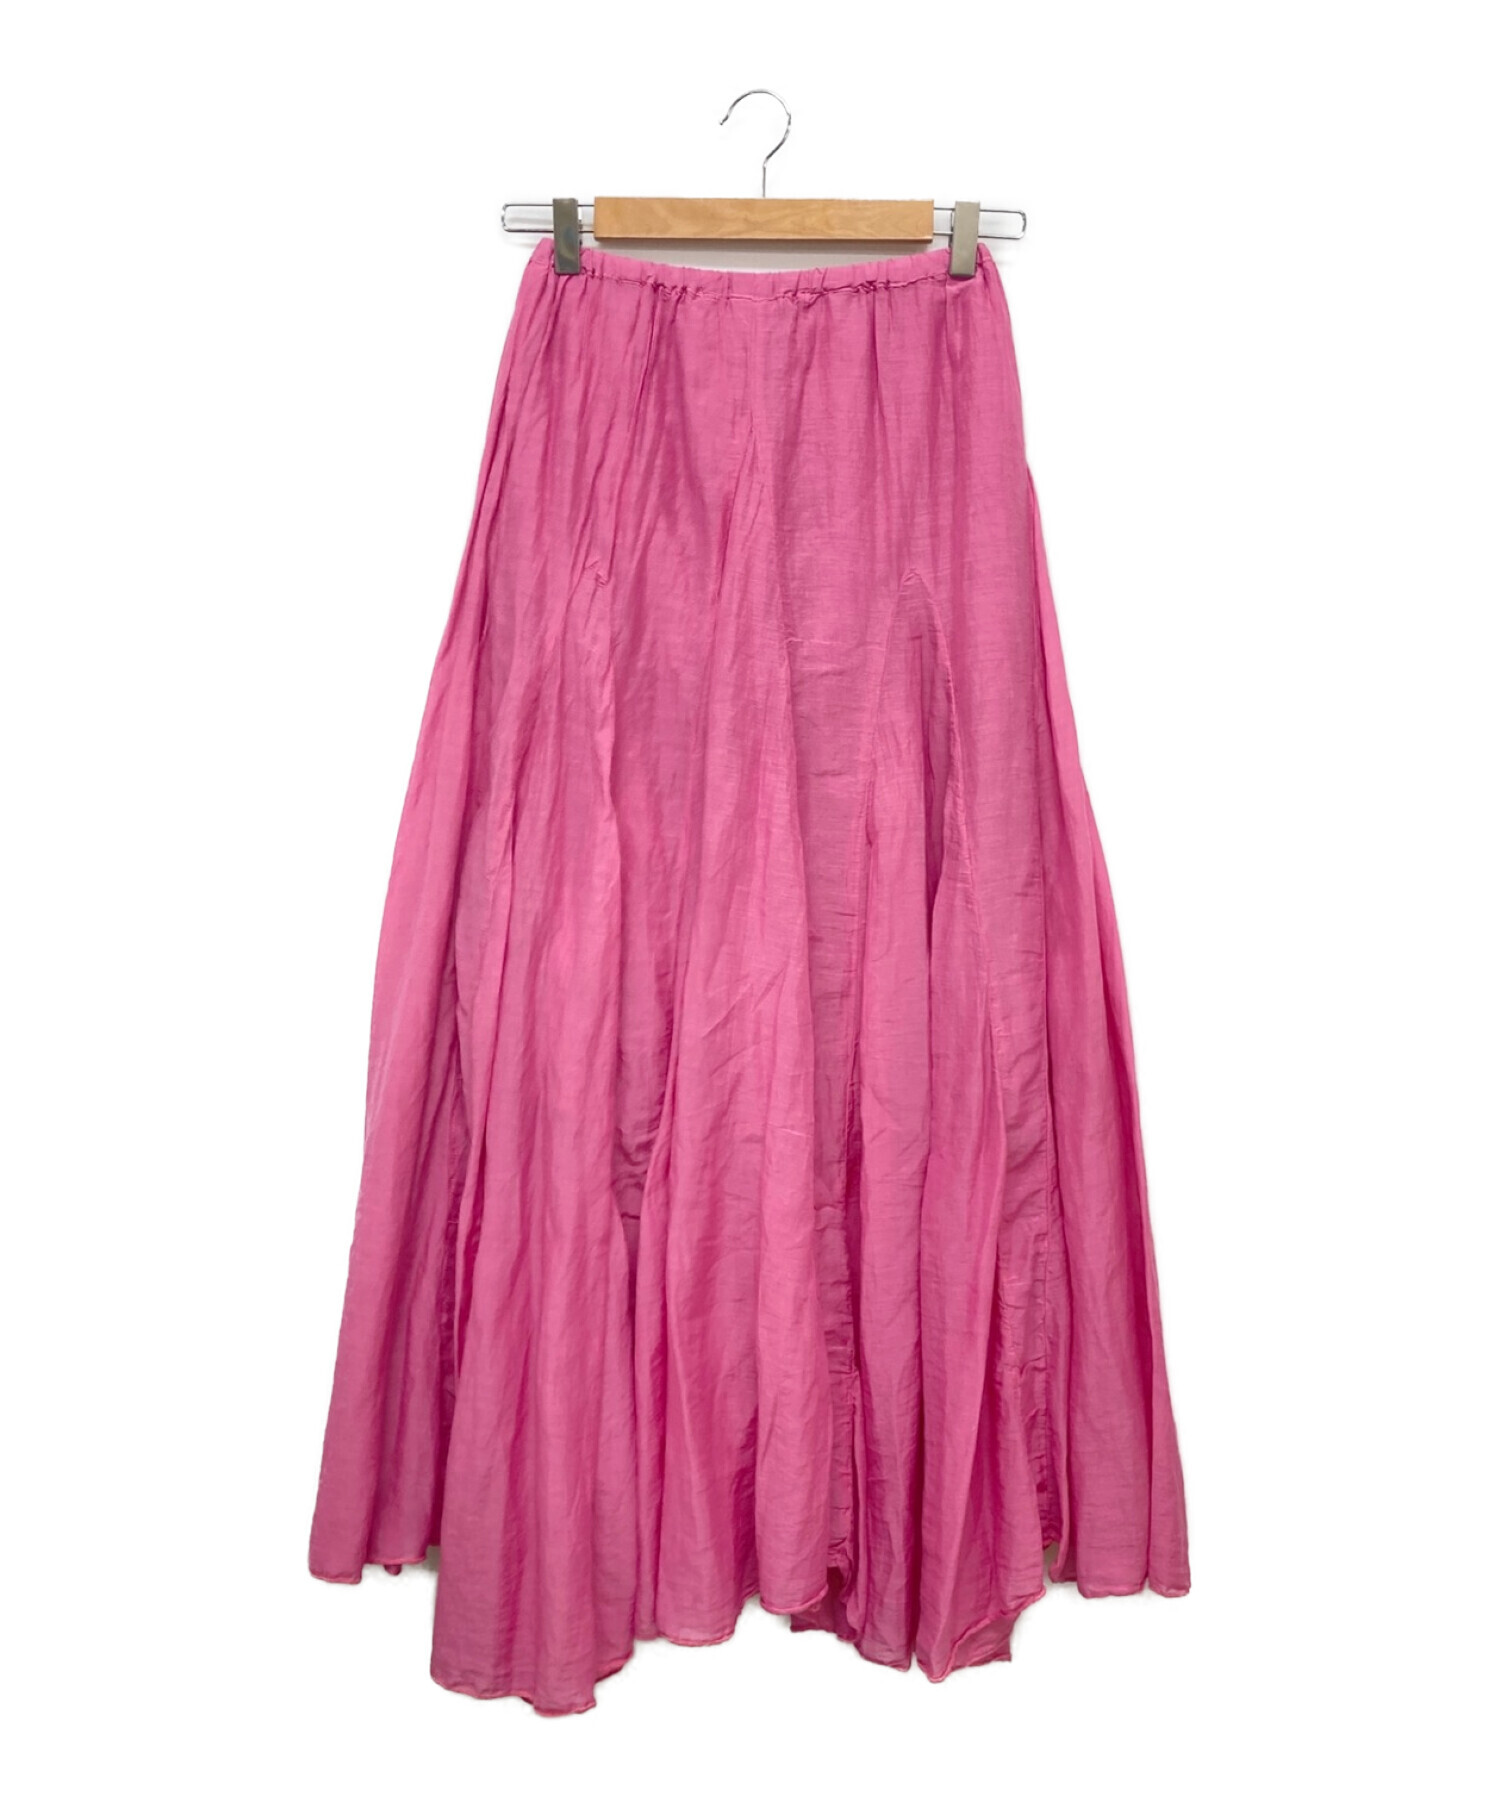 Ron Herman × CPSHADES Lily skirts ダークピンク定価39400円